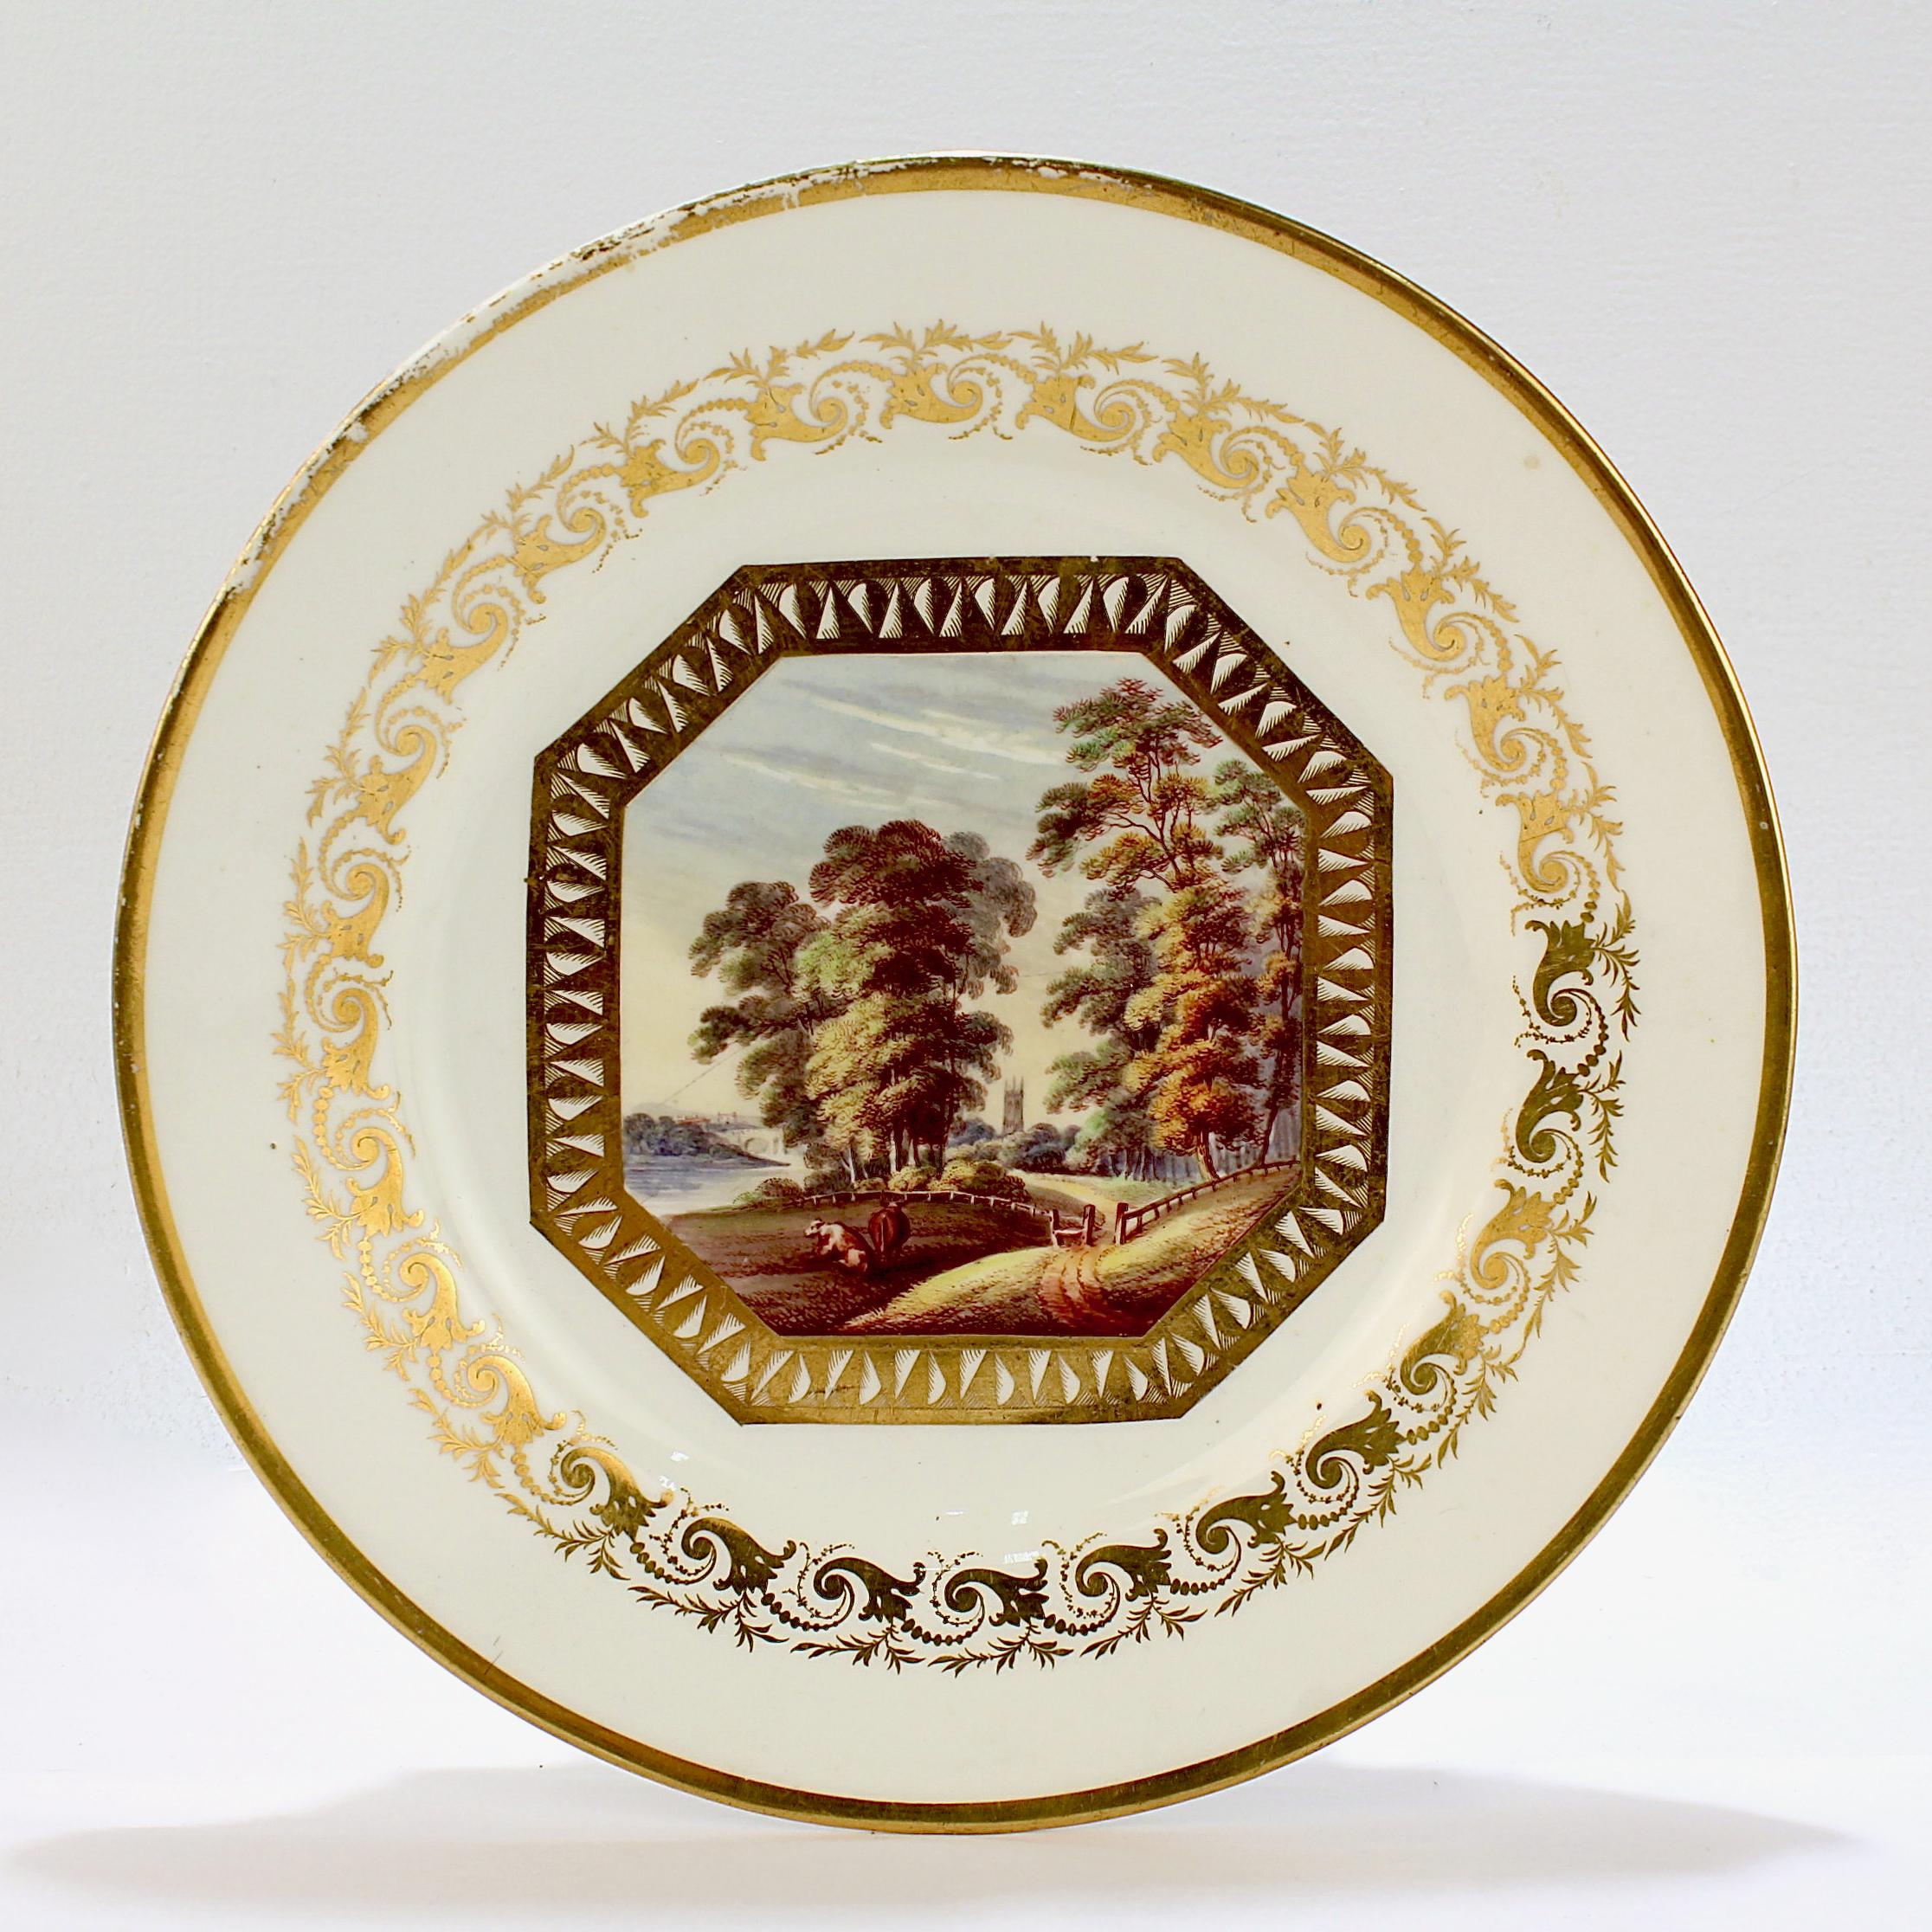 A fine antique 19th century Derby hard paste porcelain plate.

Decorated with a hand painted topographical scene to its center.

The scene depicts a bucolic landscape 'Near Derby' in a gilt cartouche and surrounded by a gilt cornucopia design.